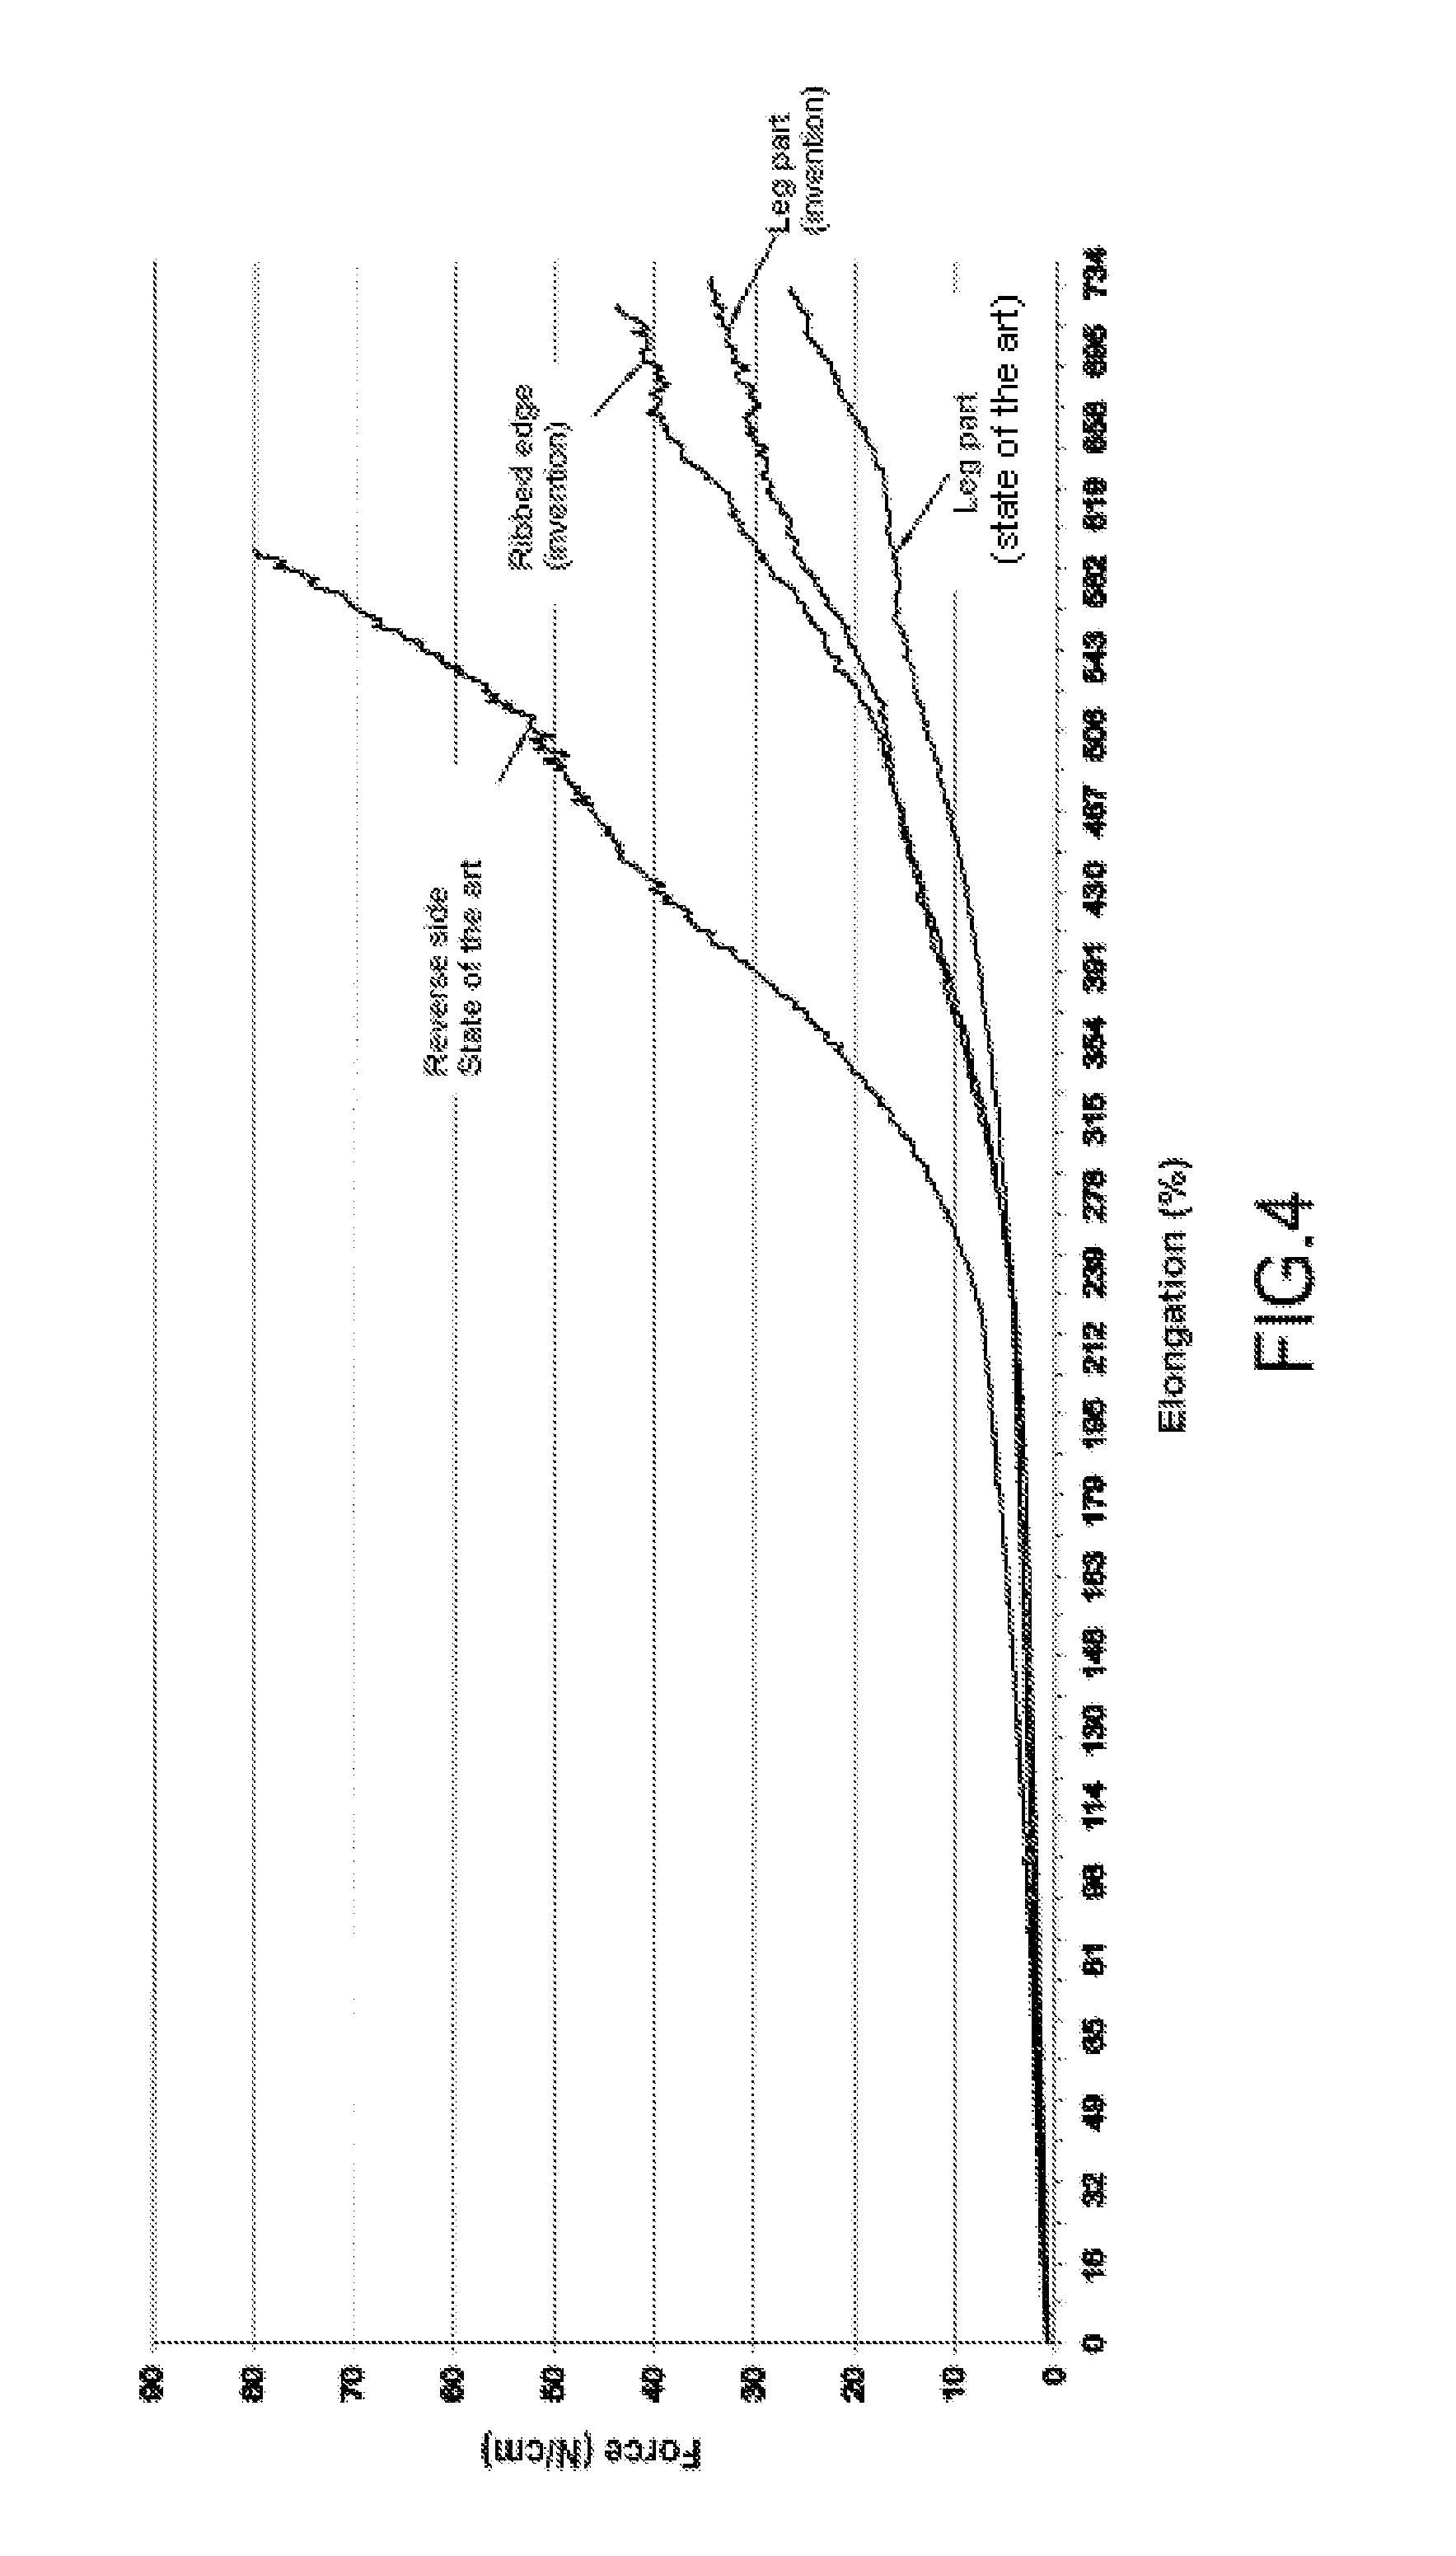 Method for producing a tubular compression item, and item thereby obtained